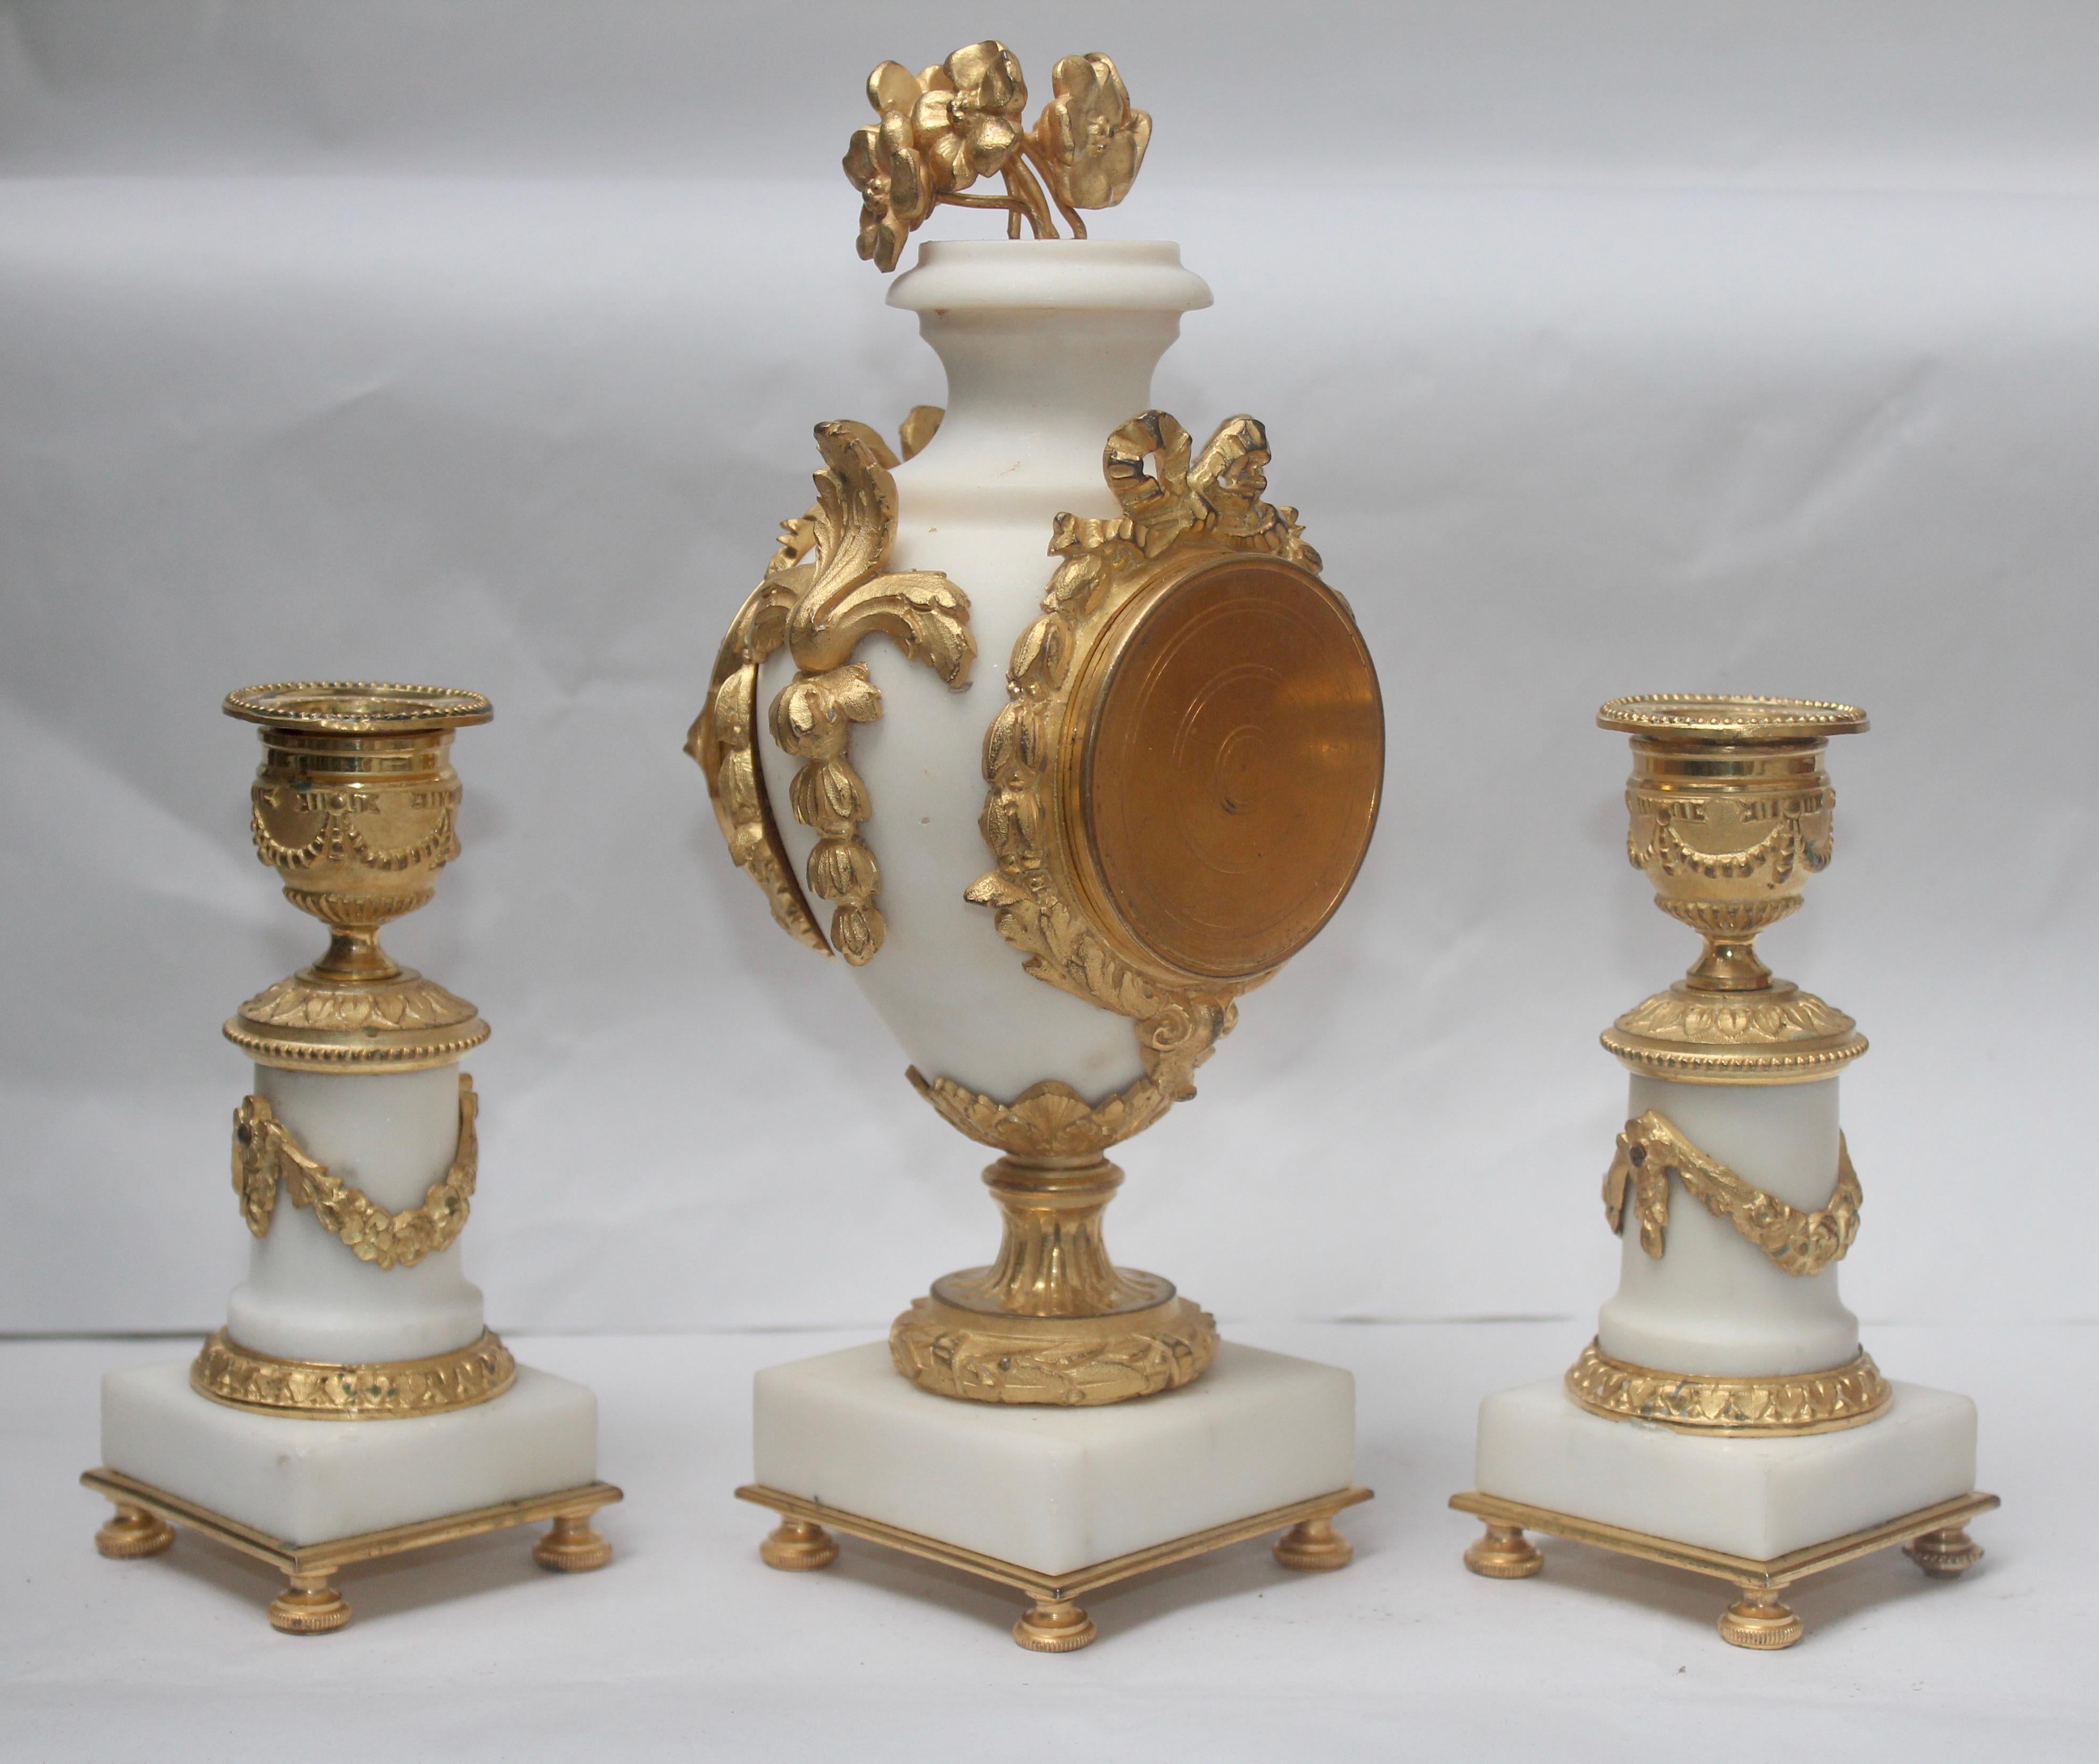 Gilt French Ormolu and White Marble Three-Pieces Vase Shaped Clock Garniture